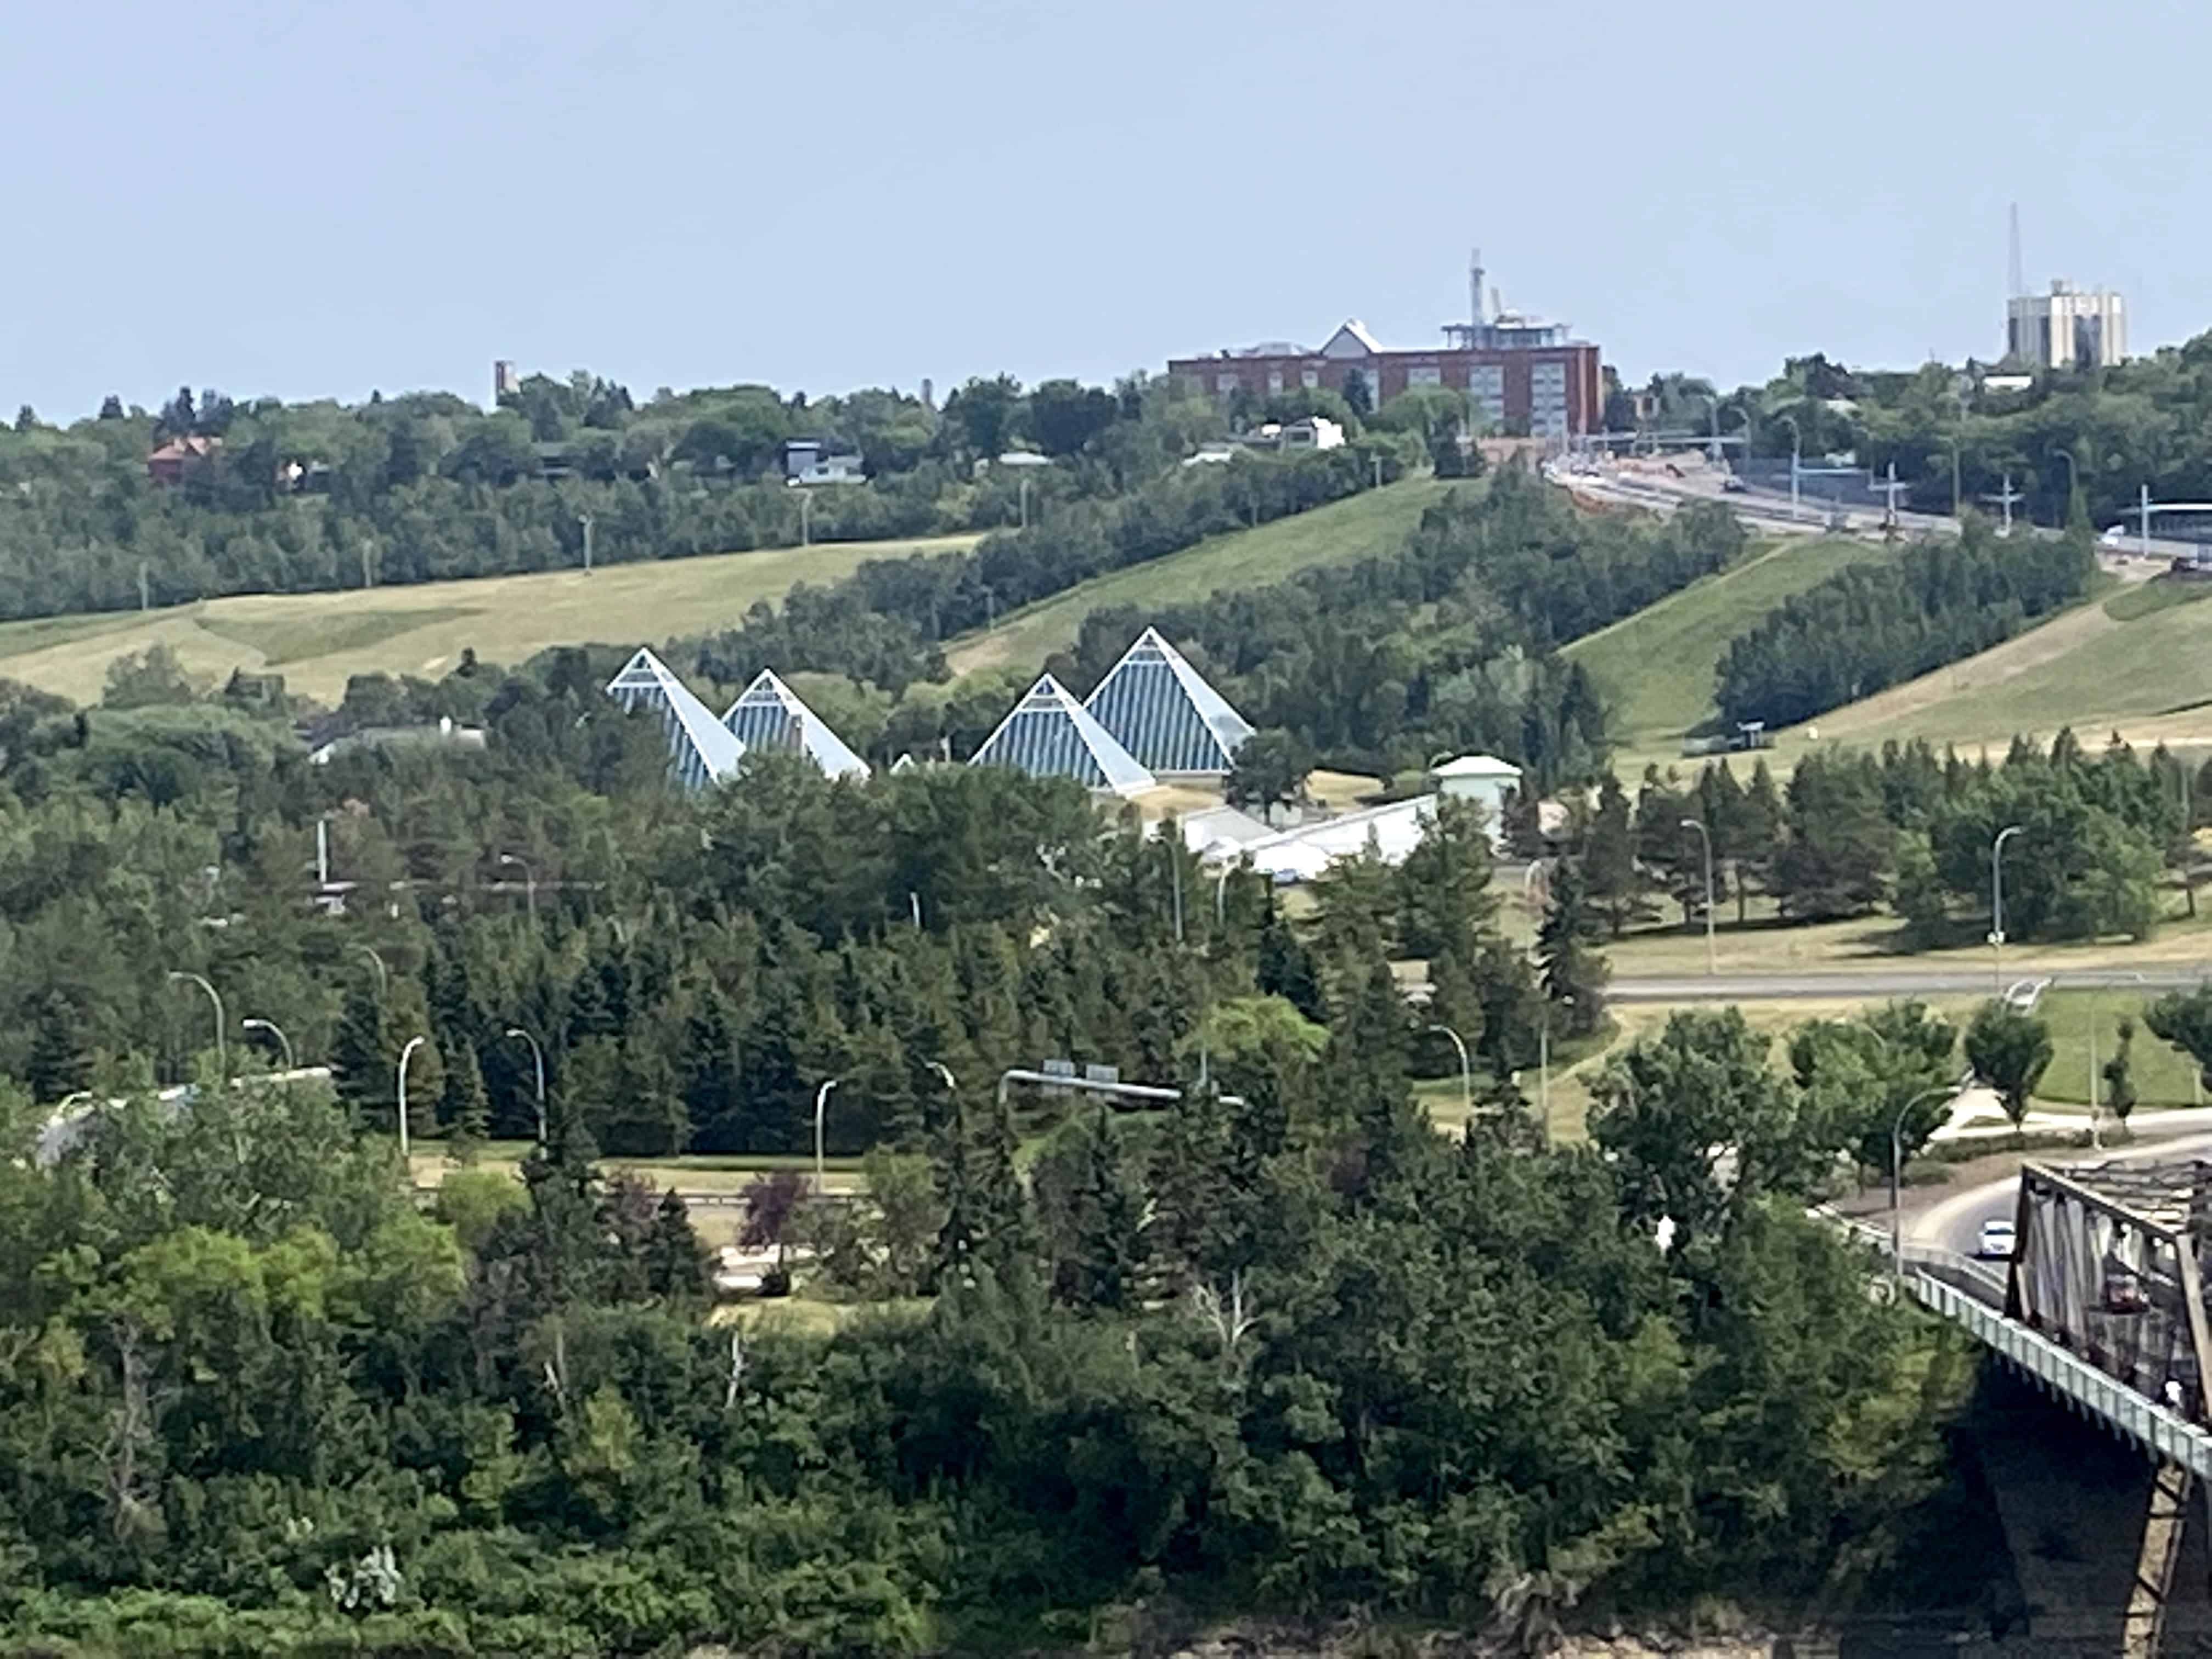 The Muttart Conservatory from across the Low Level Bridge
